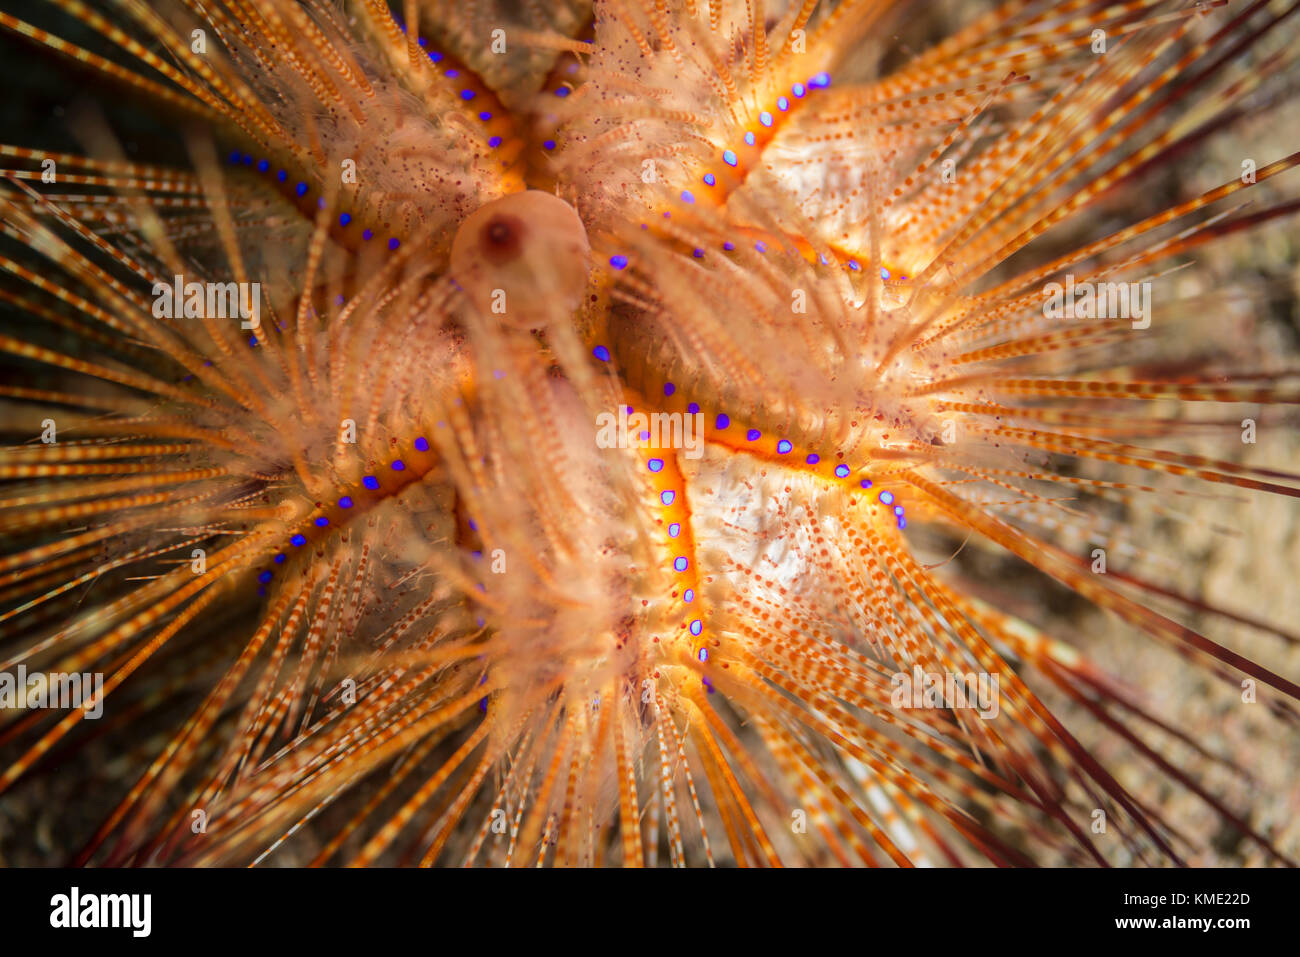 Blue-spotted sea urchin on the sea floor Stock Photo